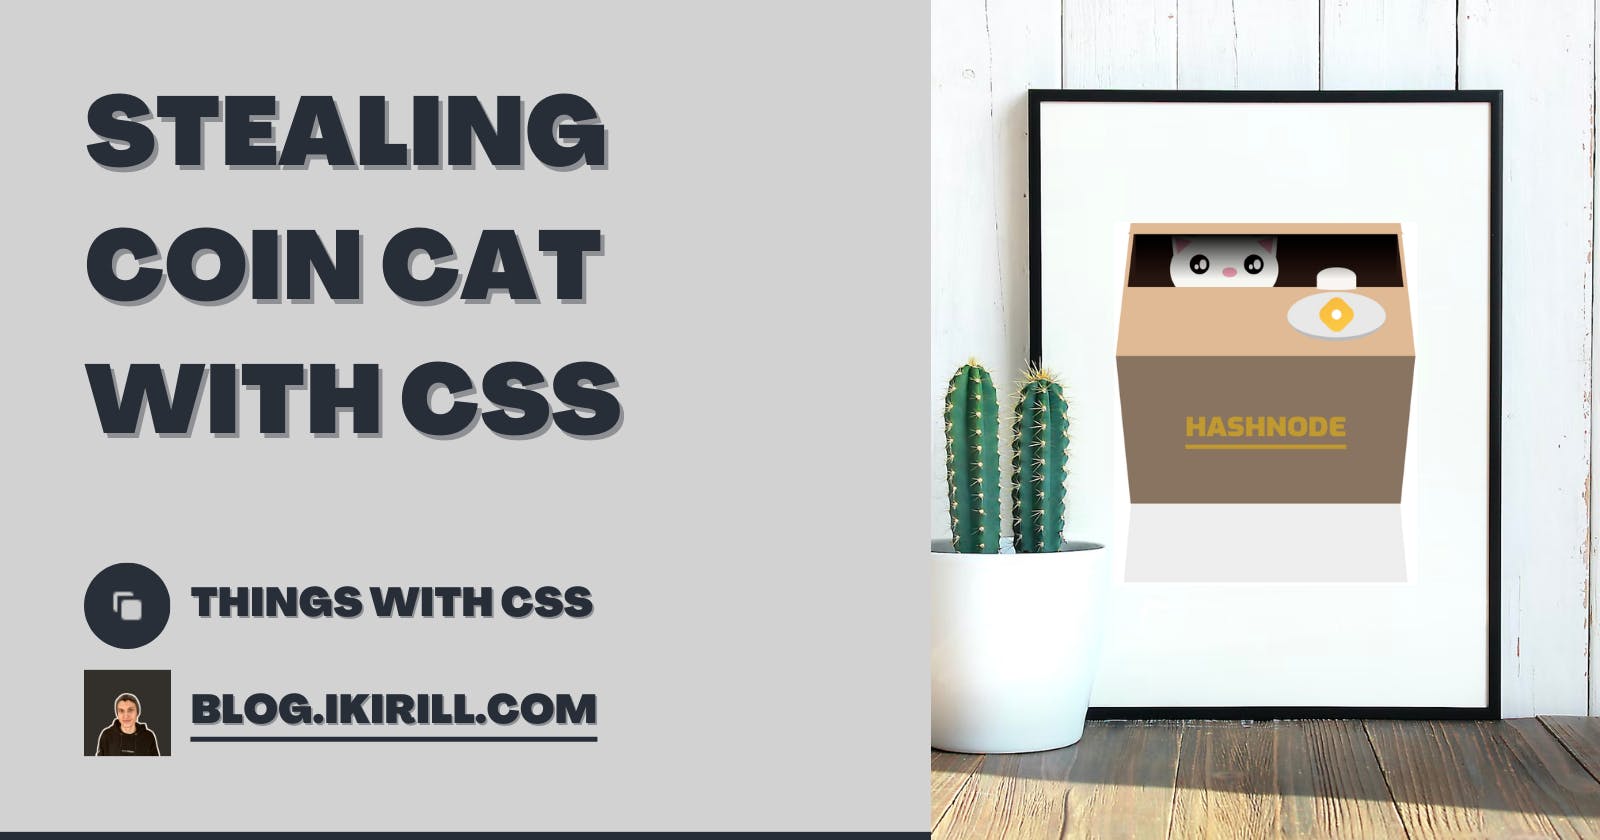 Stealing Coin Cat with CSS